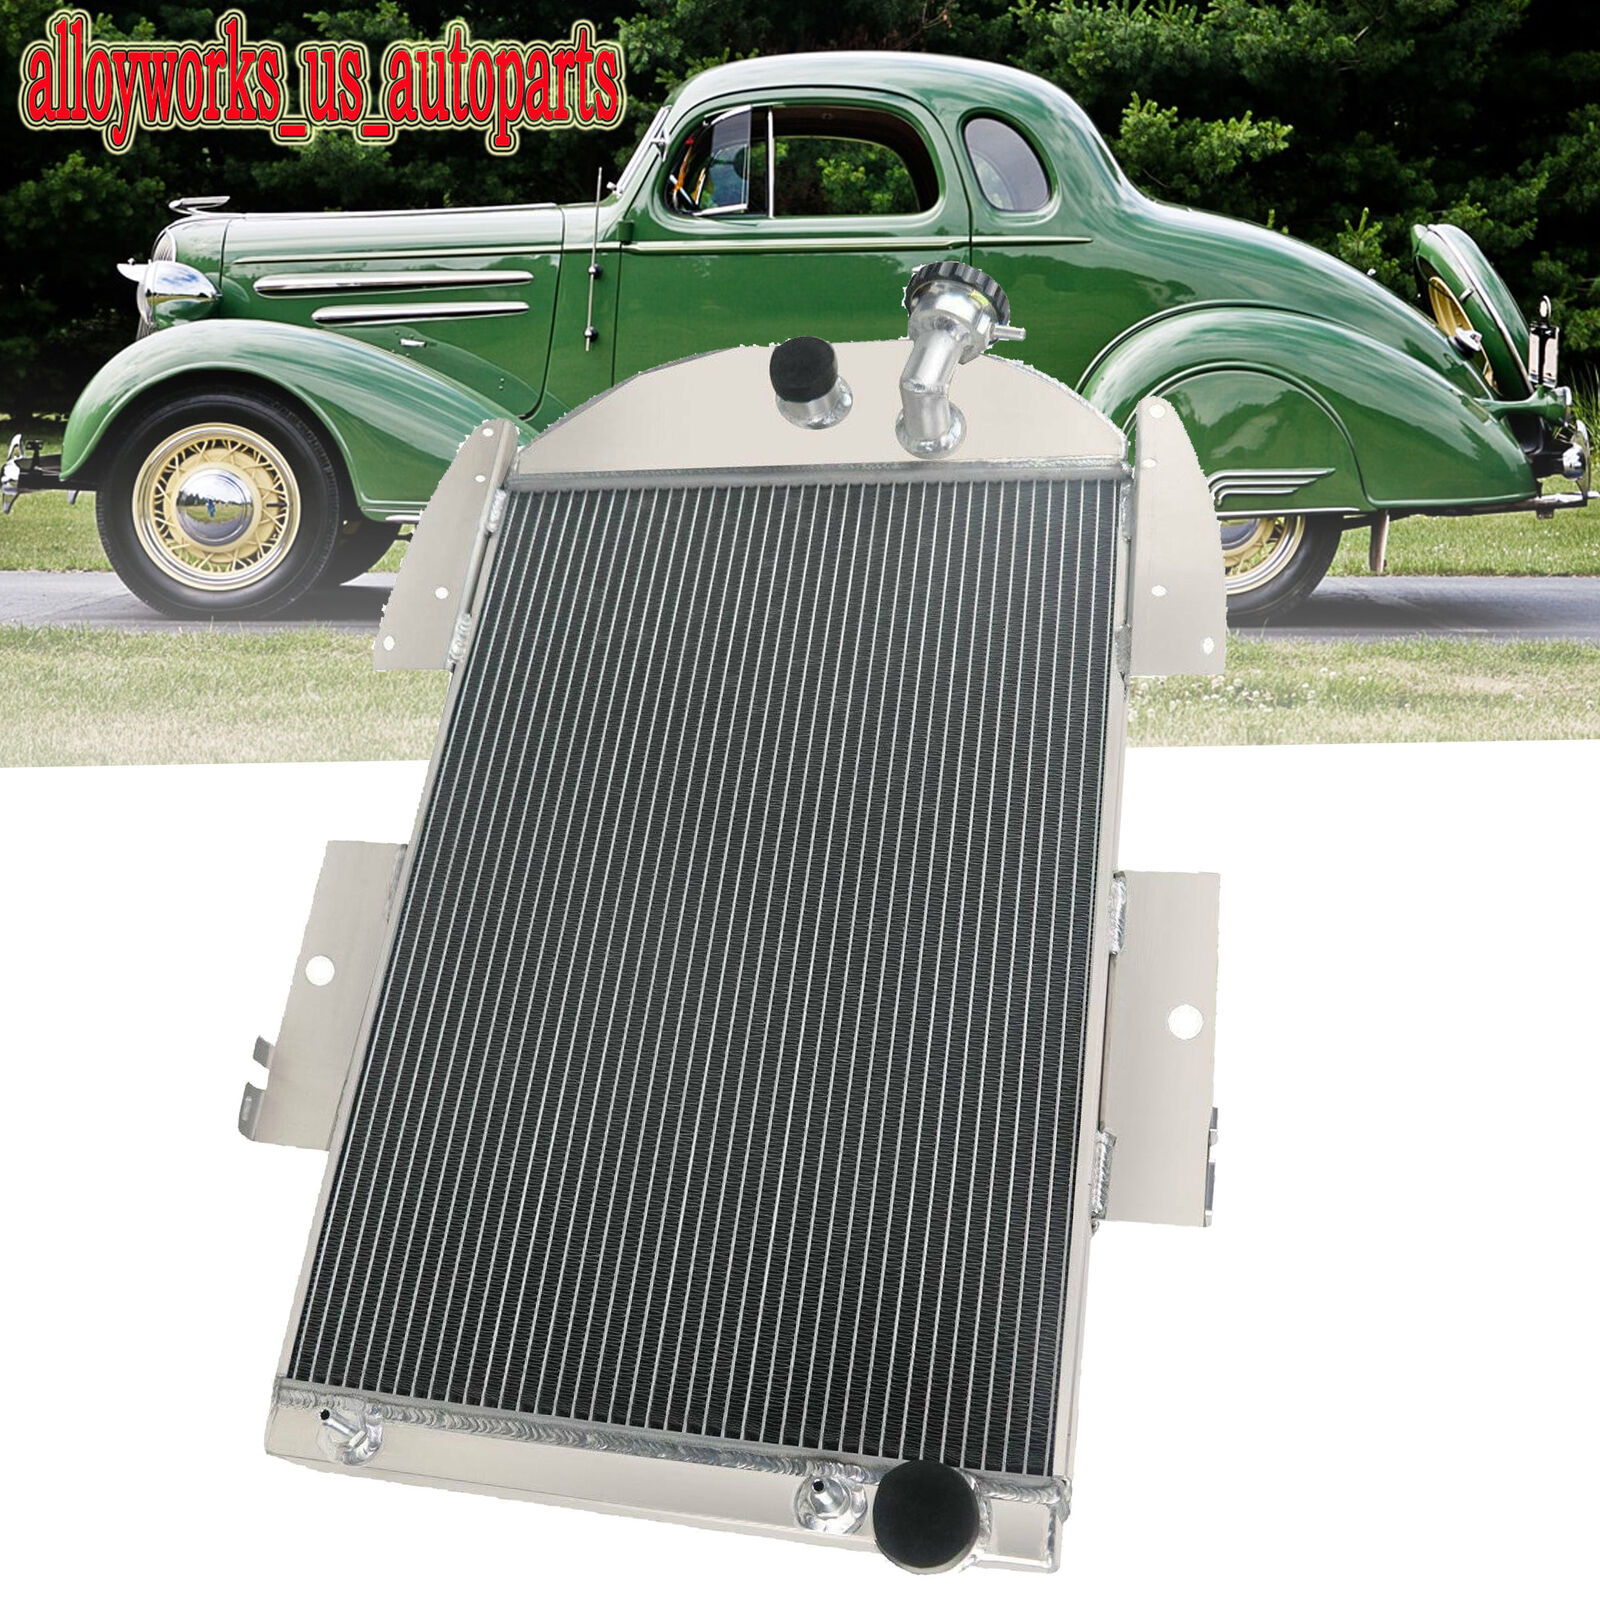 ALL ALUMINUM 4 ROWS RADIATOR FOR 1935 1936 CHEVY MASTER DELUXE TRUCK PICKUP 3.4L